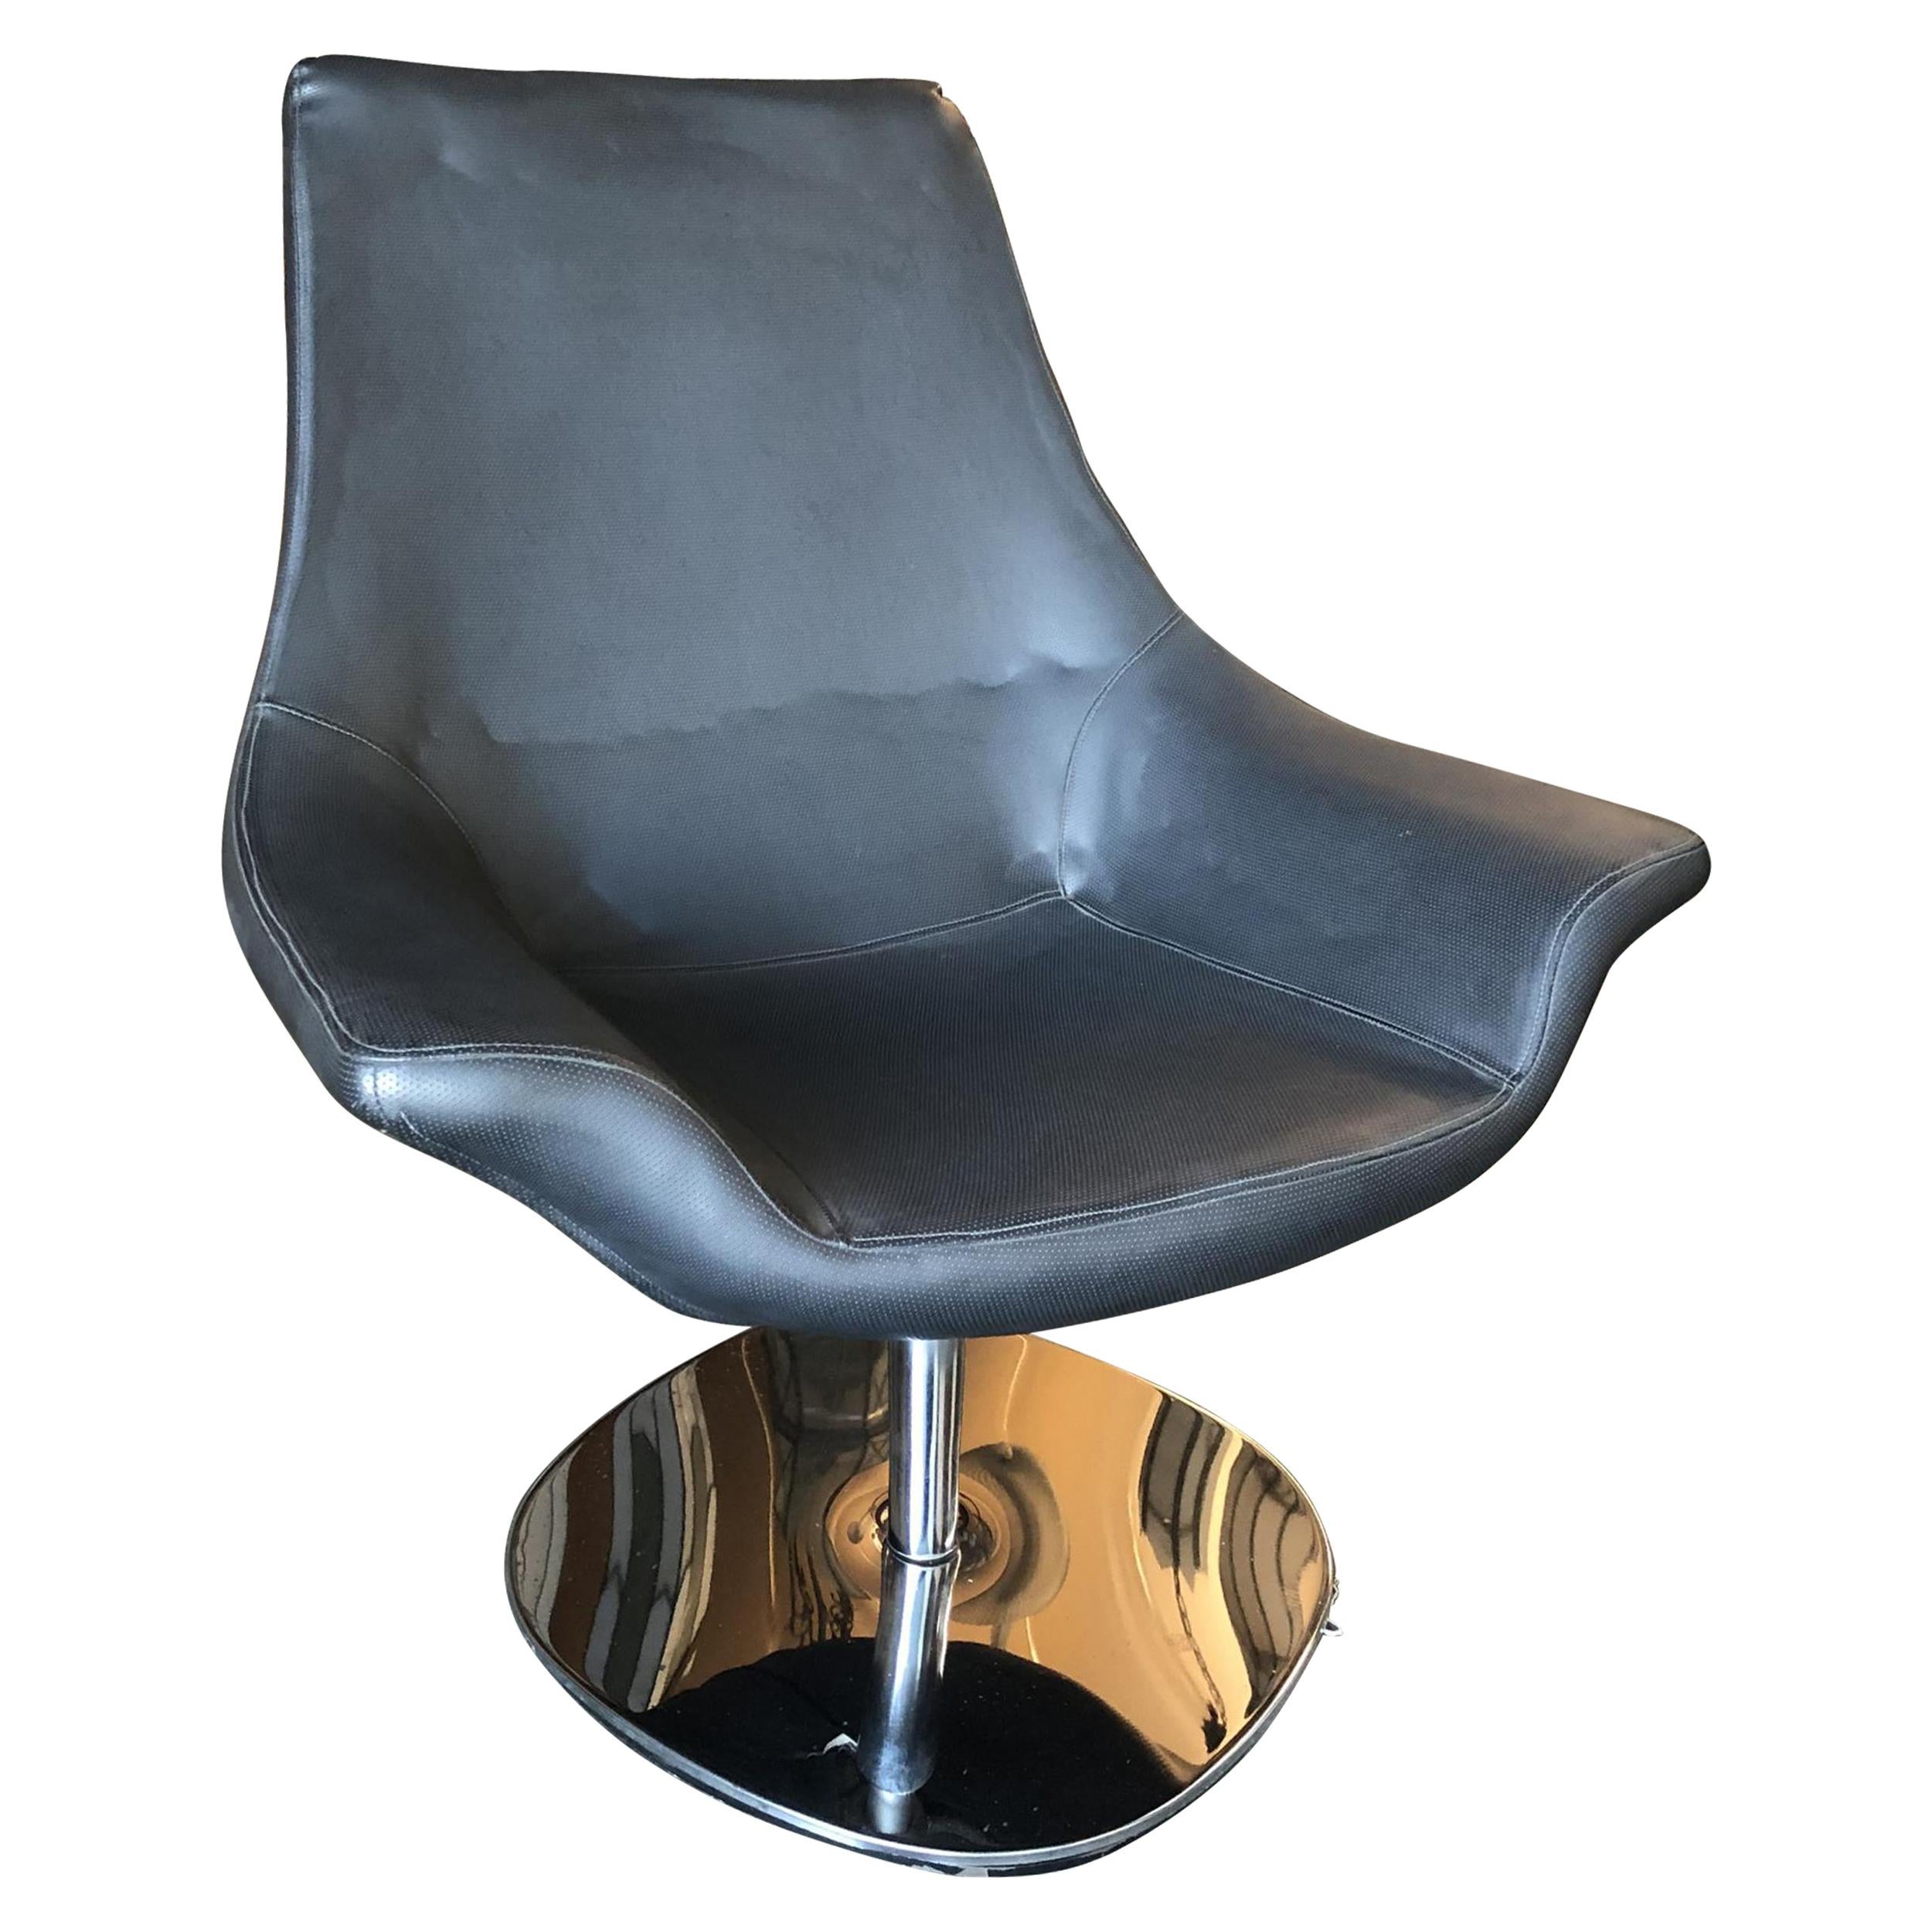 Modernist Leather Captian's Lounge Chair with Chrome Base, Circa 1980